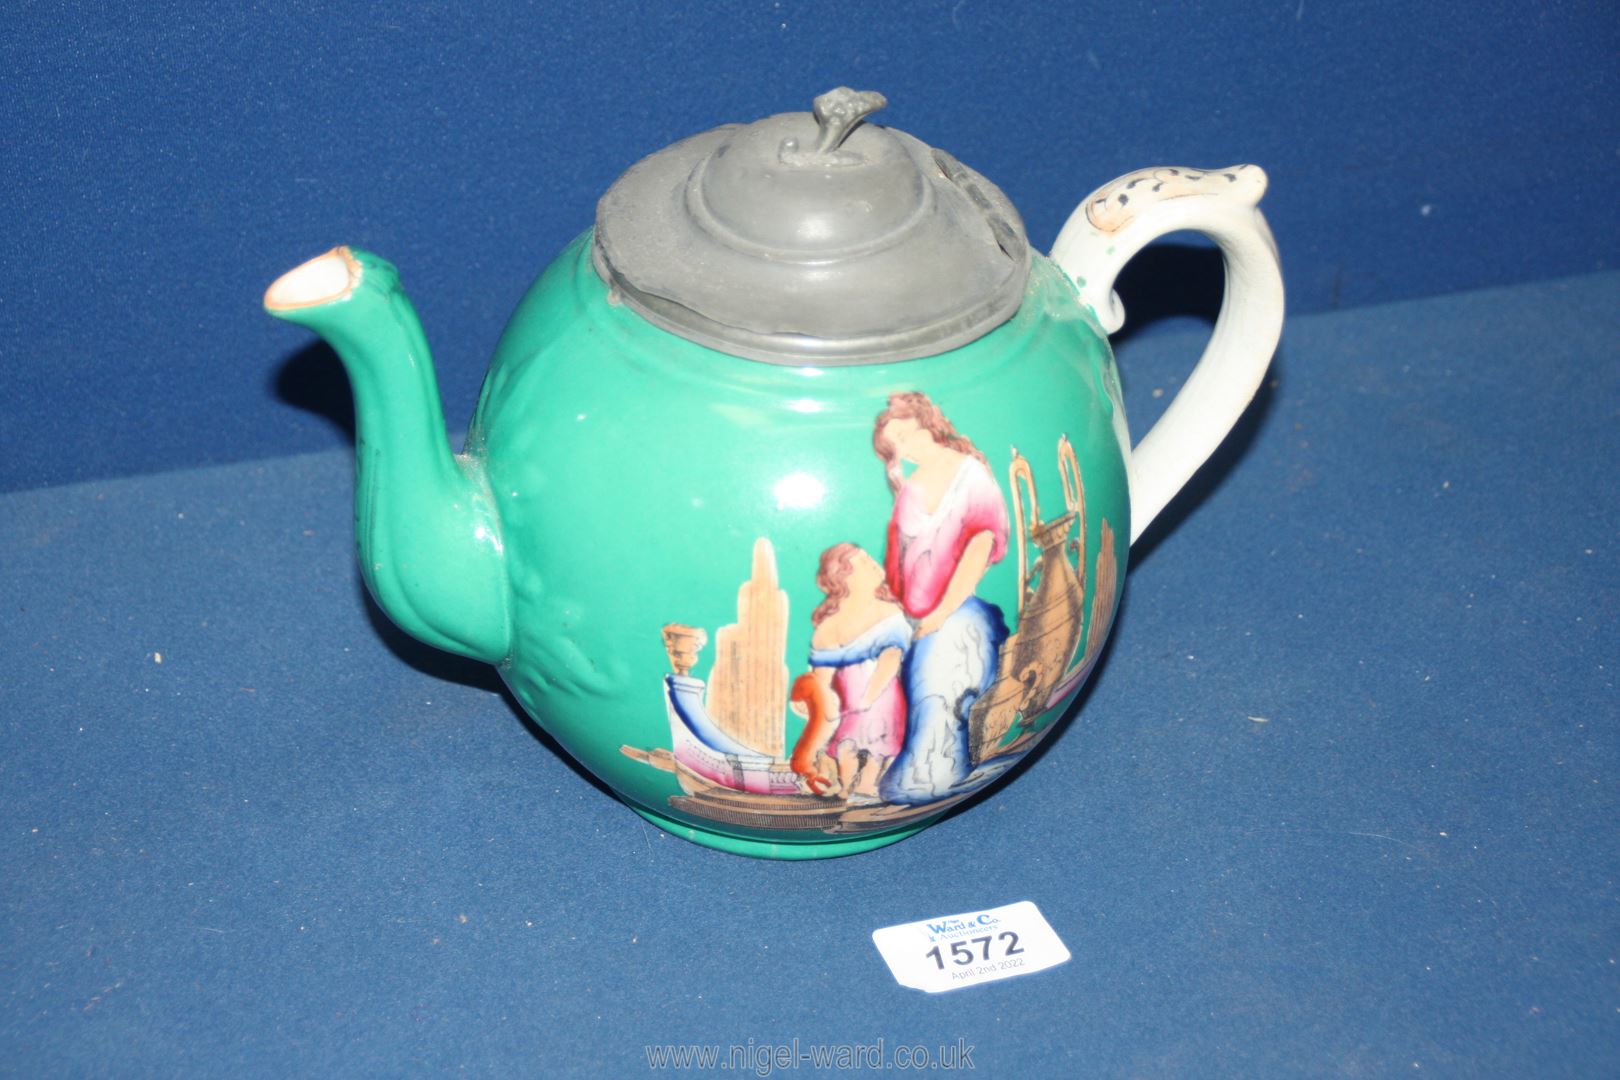 A fine and unusual Staffordshire teapot, mid-19th century, - Image 2 of 3